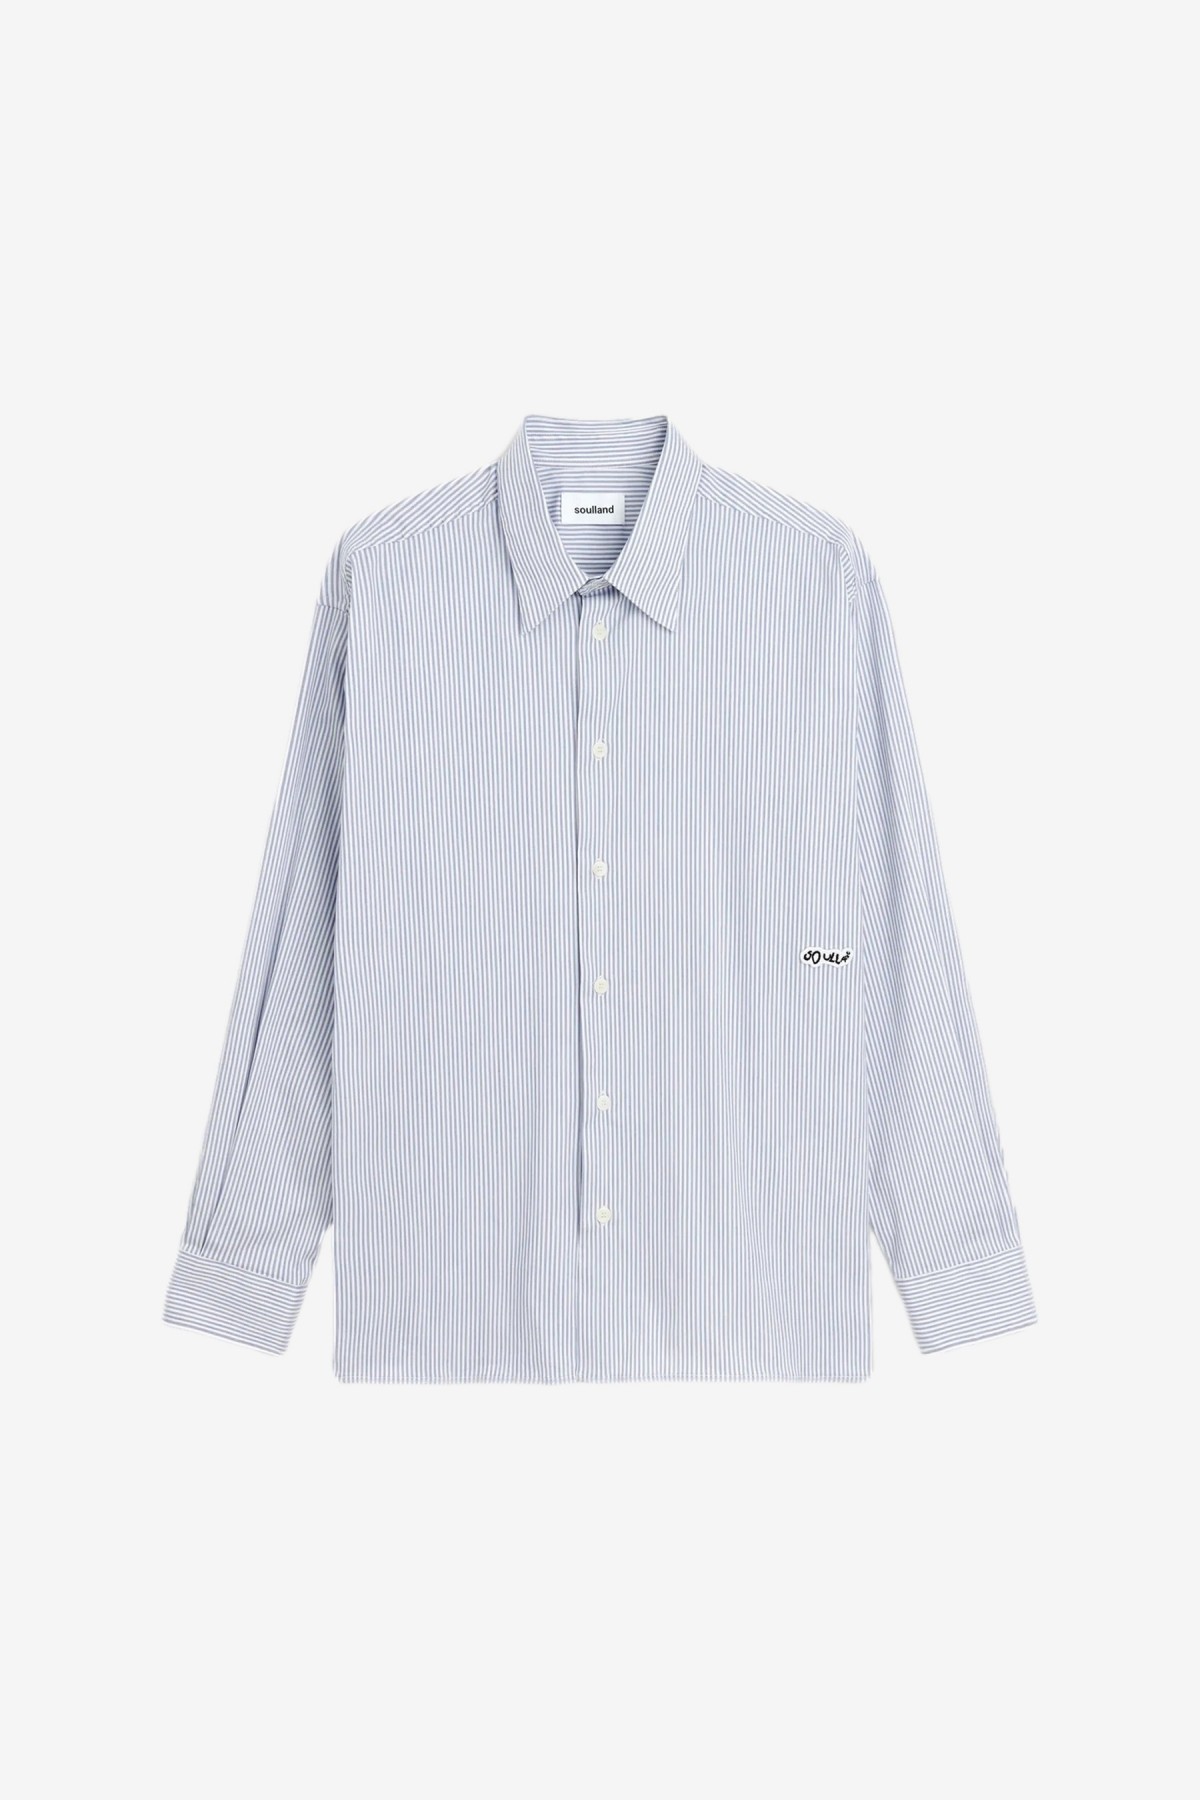 Soulland Perry Shirt in White/Blue Stripes